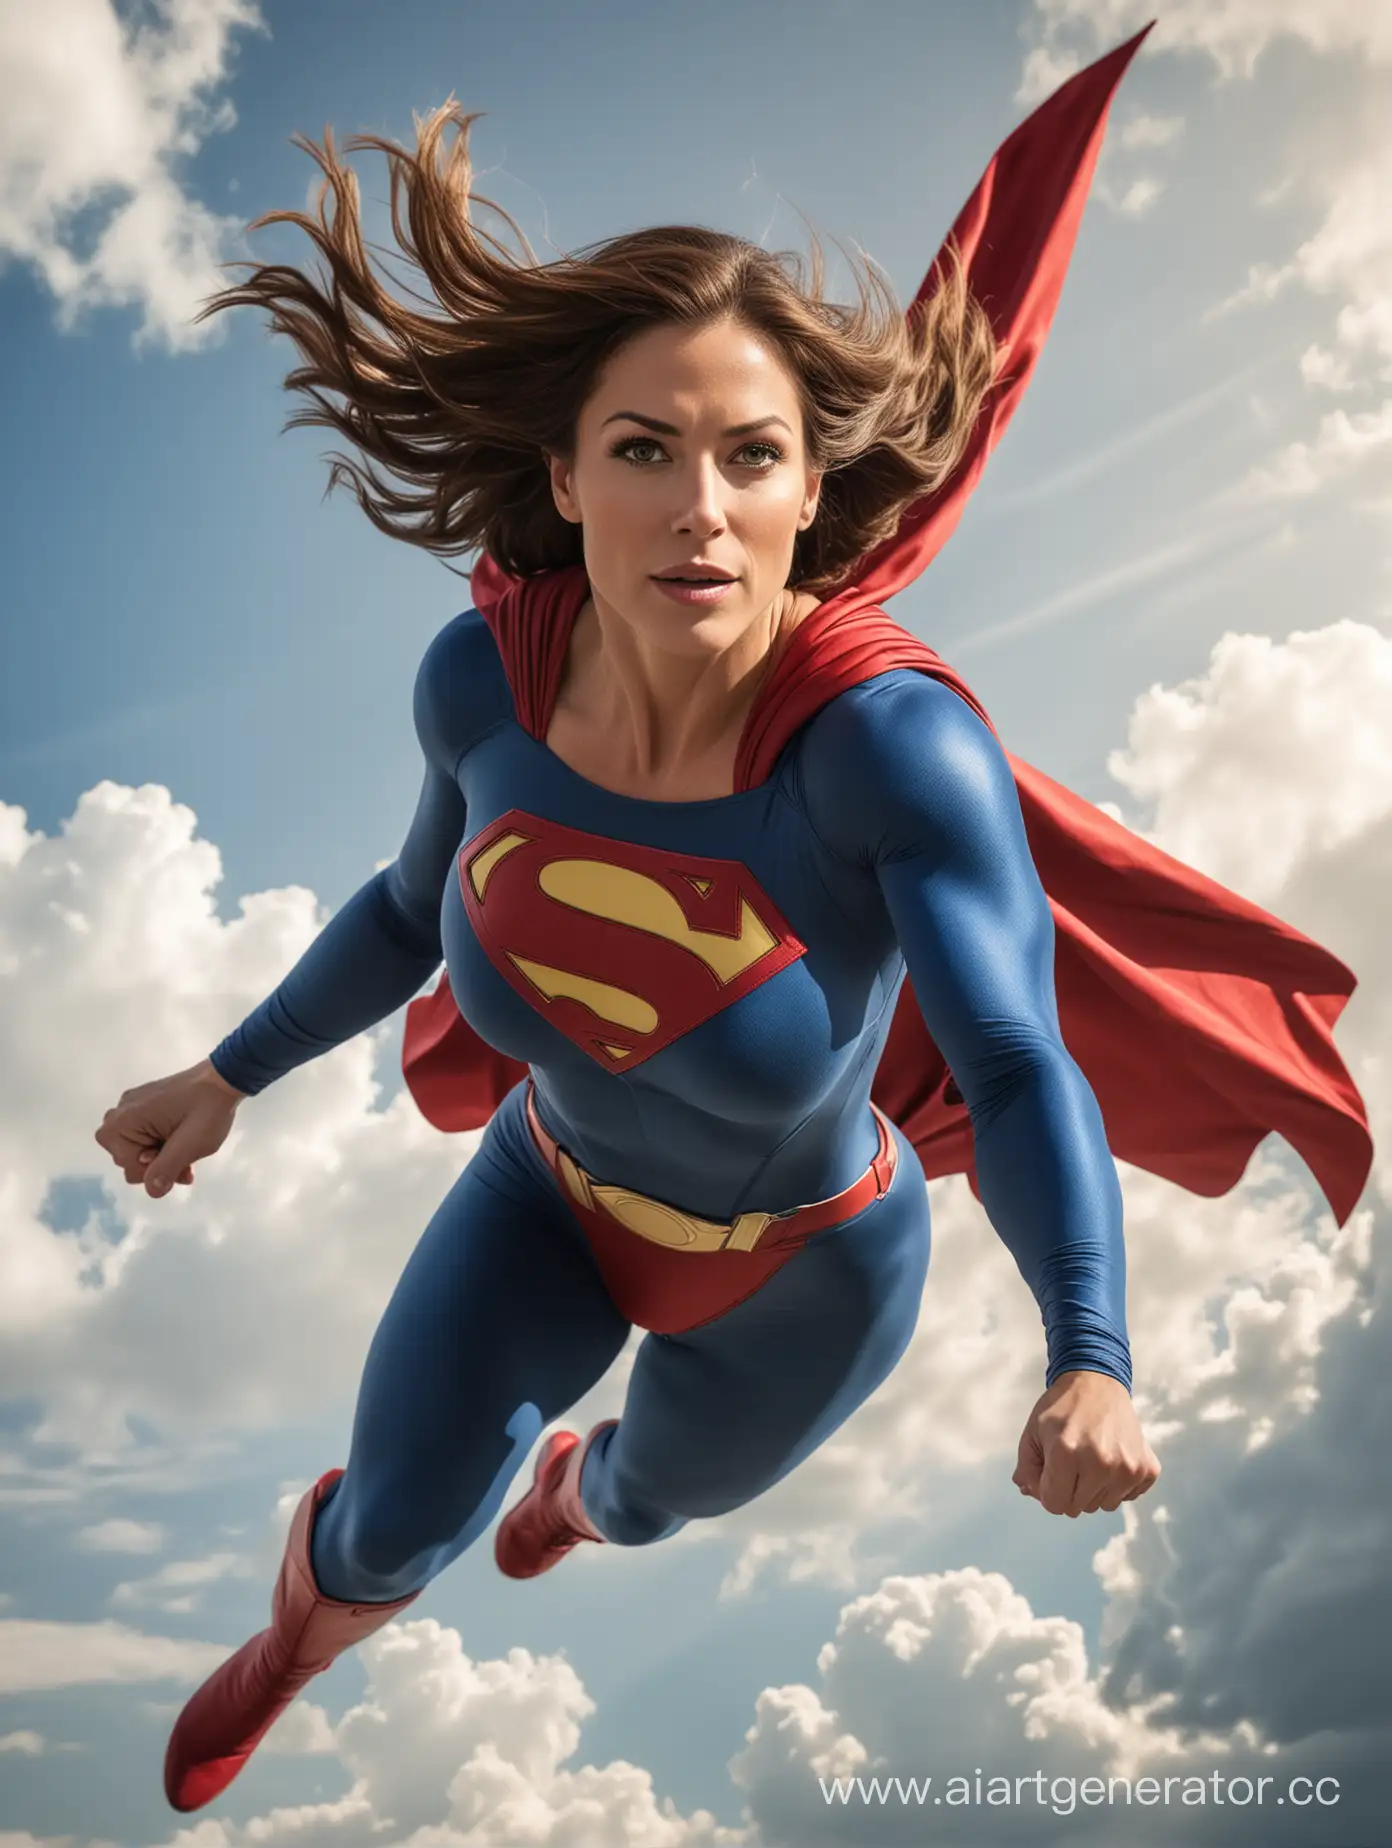 A beautiful woman with brown hair, age 40, she is very muscular, She is flying in the sky like Superman, she is wearing the classic Superman costume